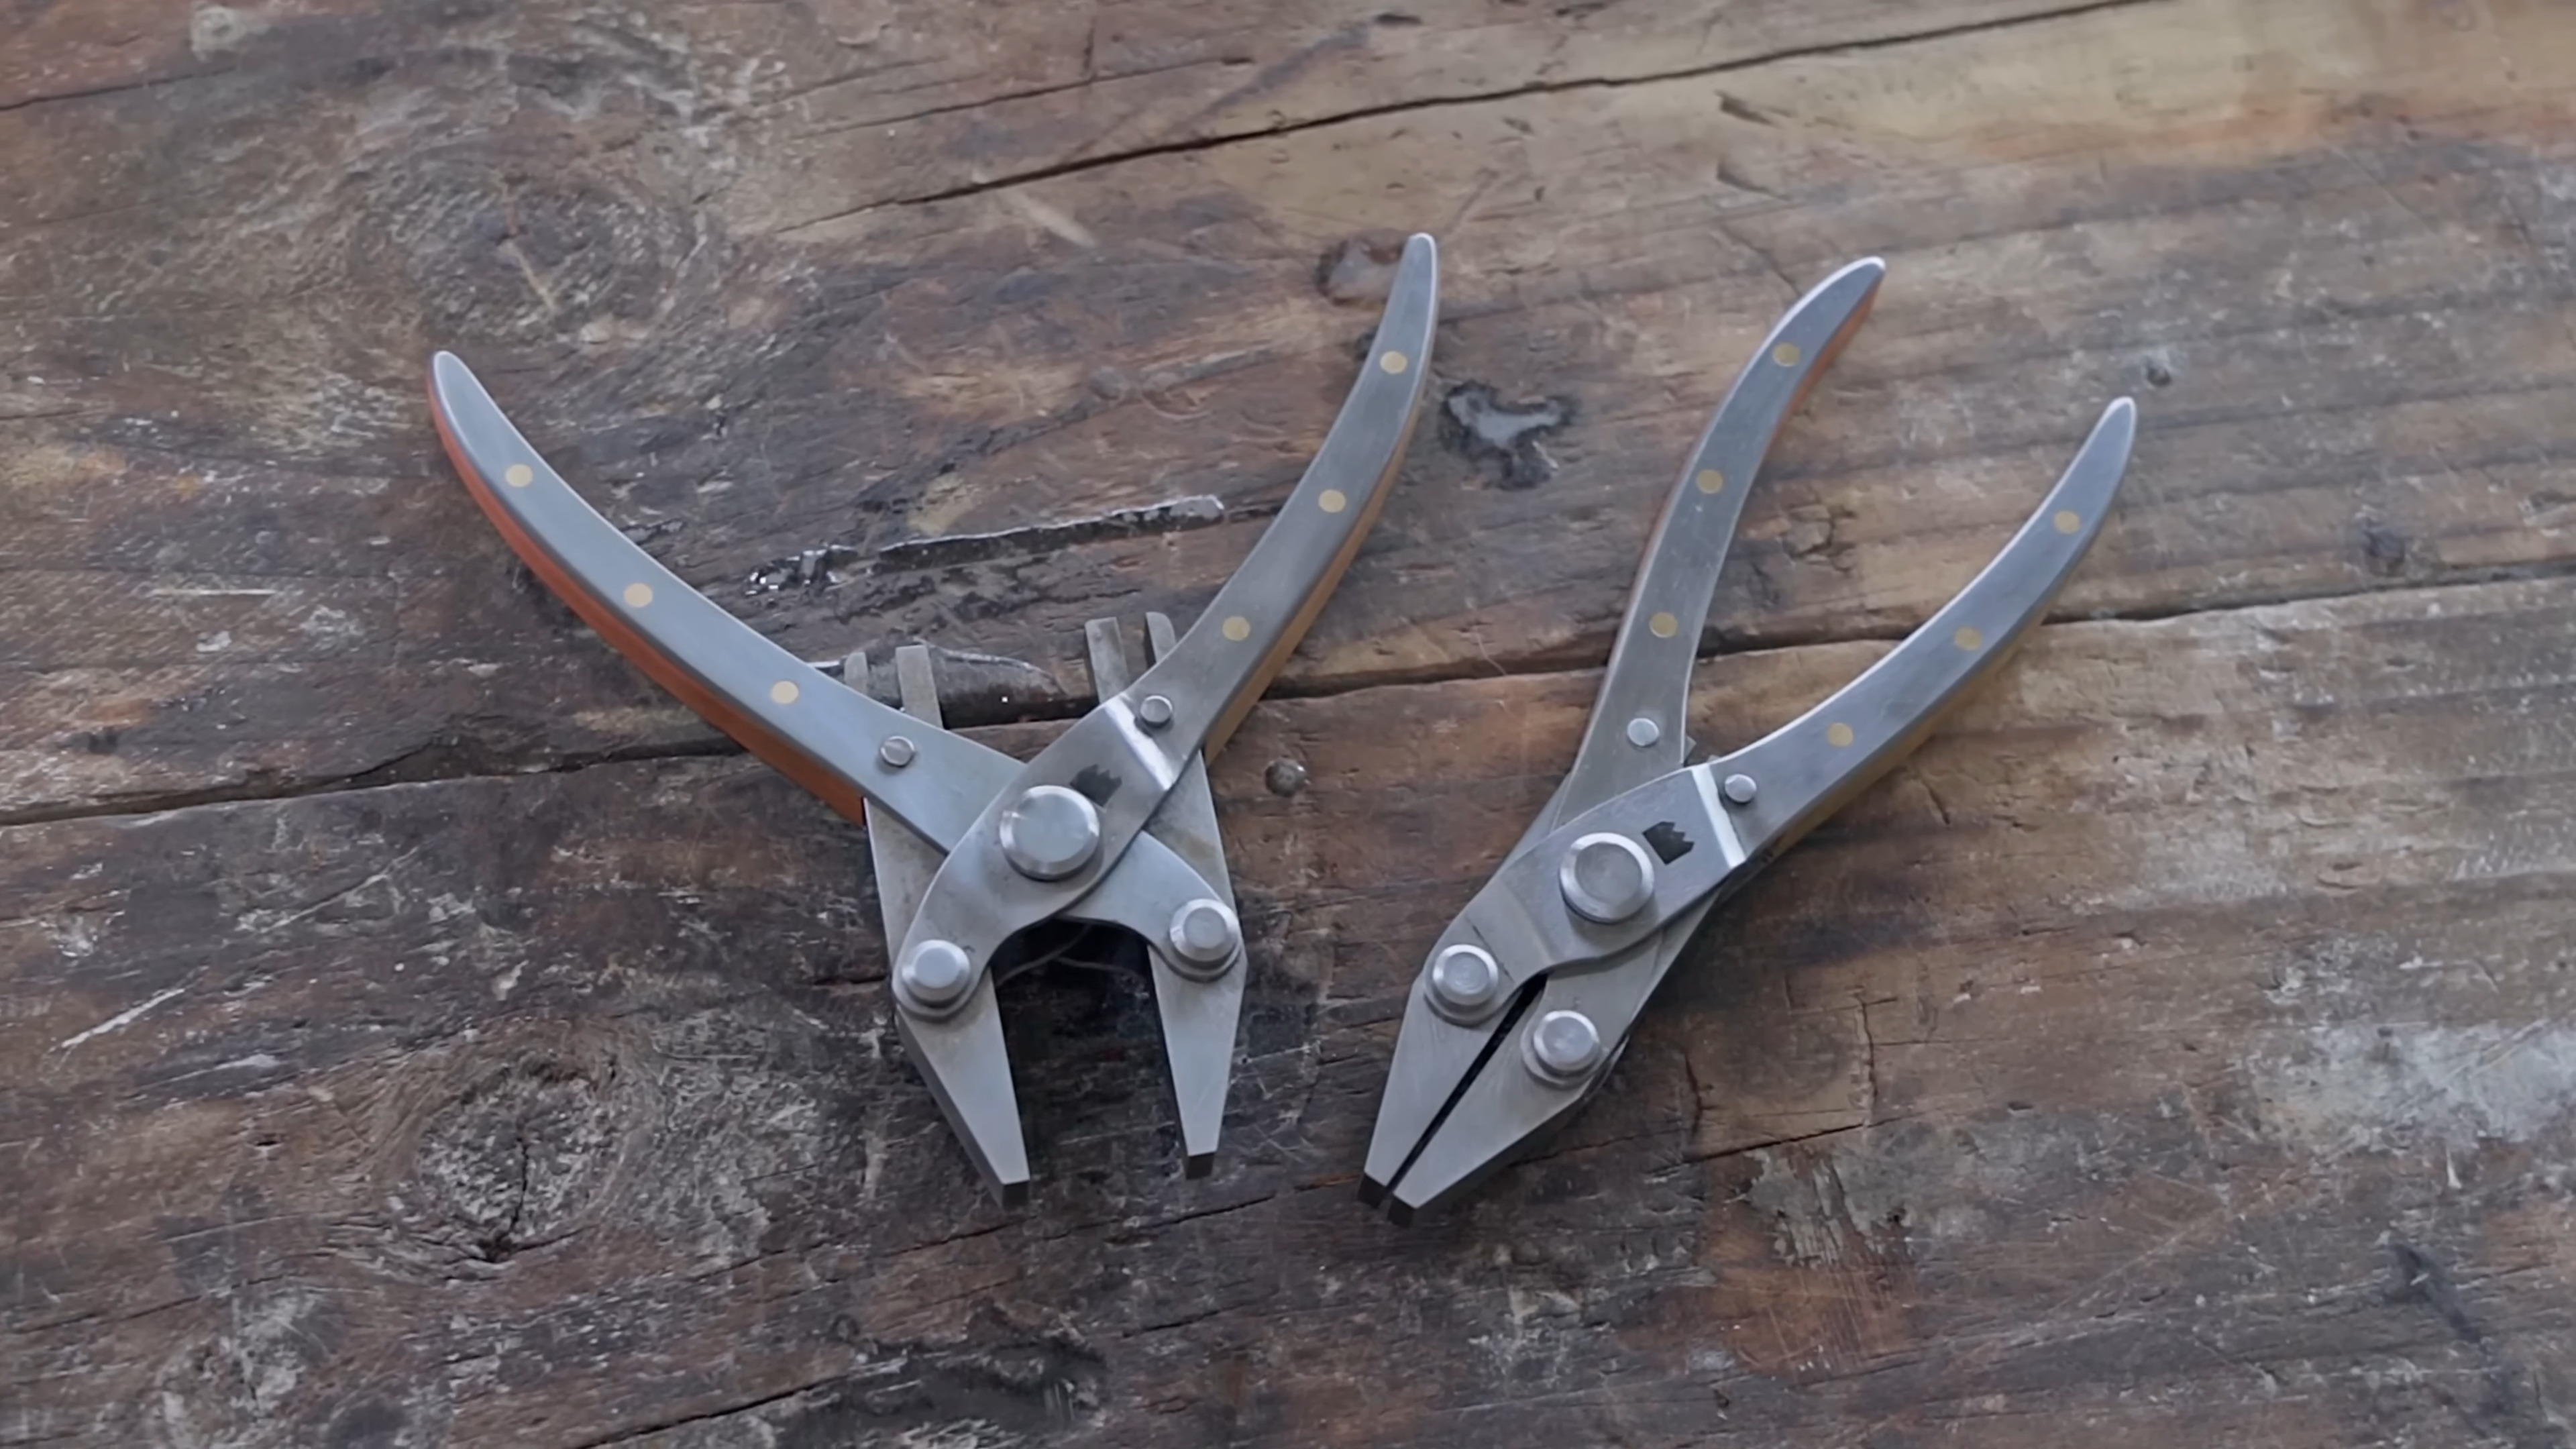 How Do Parallel Pliers Work Lets Make Some With Wow Factor And Find Out YouTube 18 18 